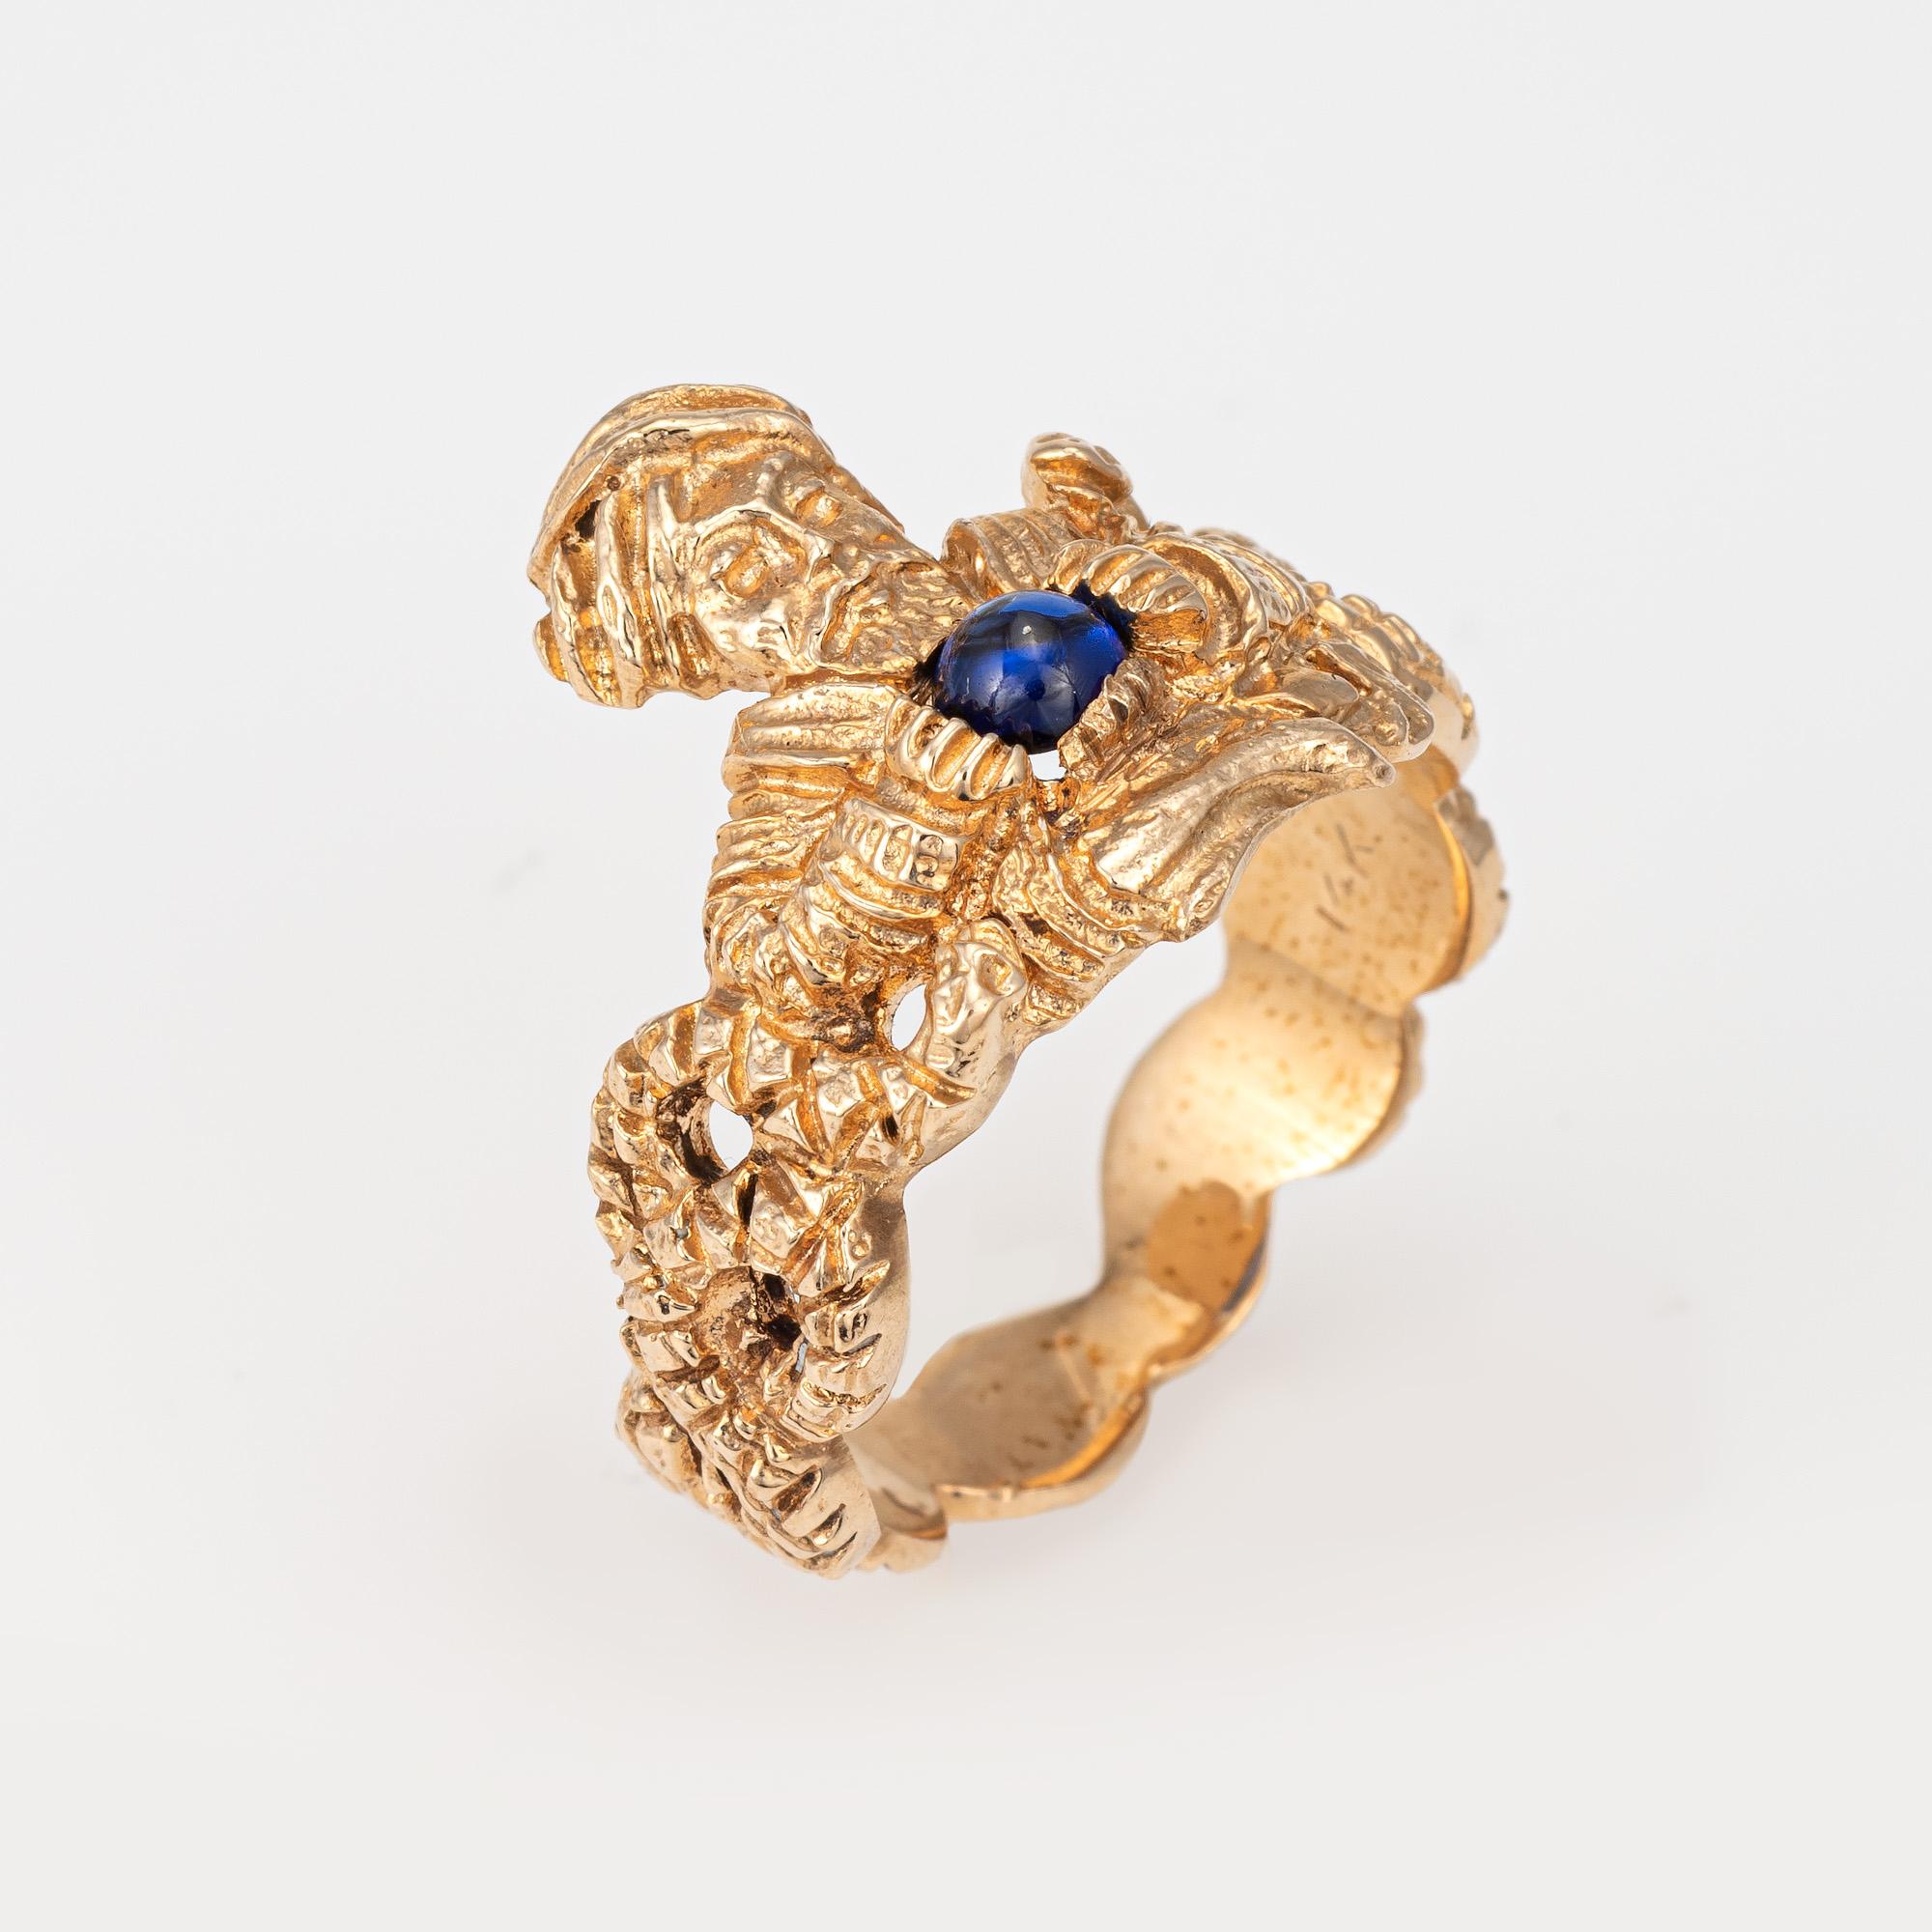 Finely detailed snake charmer ring (circa 1960s to 1970s) crafted in 14 karat yellow gold. 

Cabochon cut sapphire measures 4mm. The sapphire is in good condition and free of cracks or chips. 

The glowing cabochon cut sapphire 